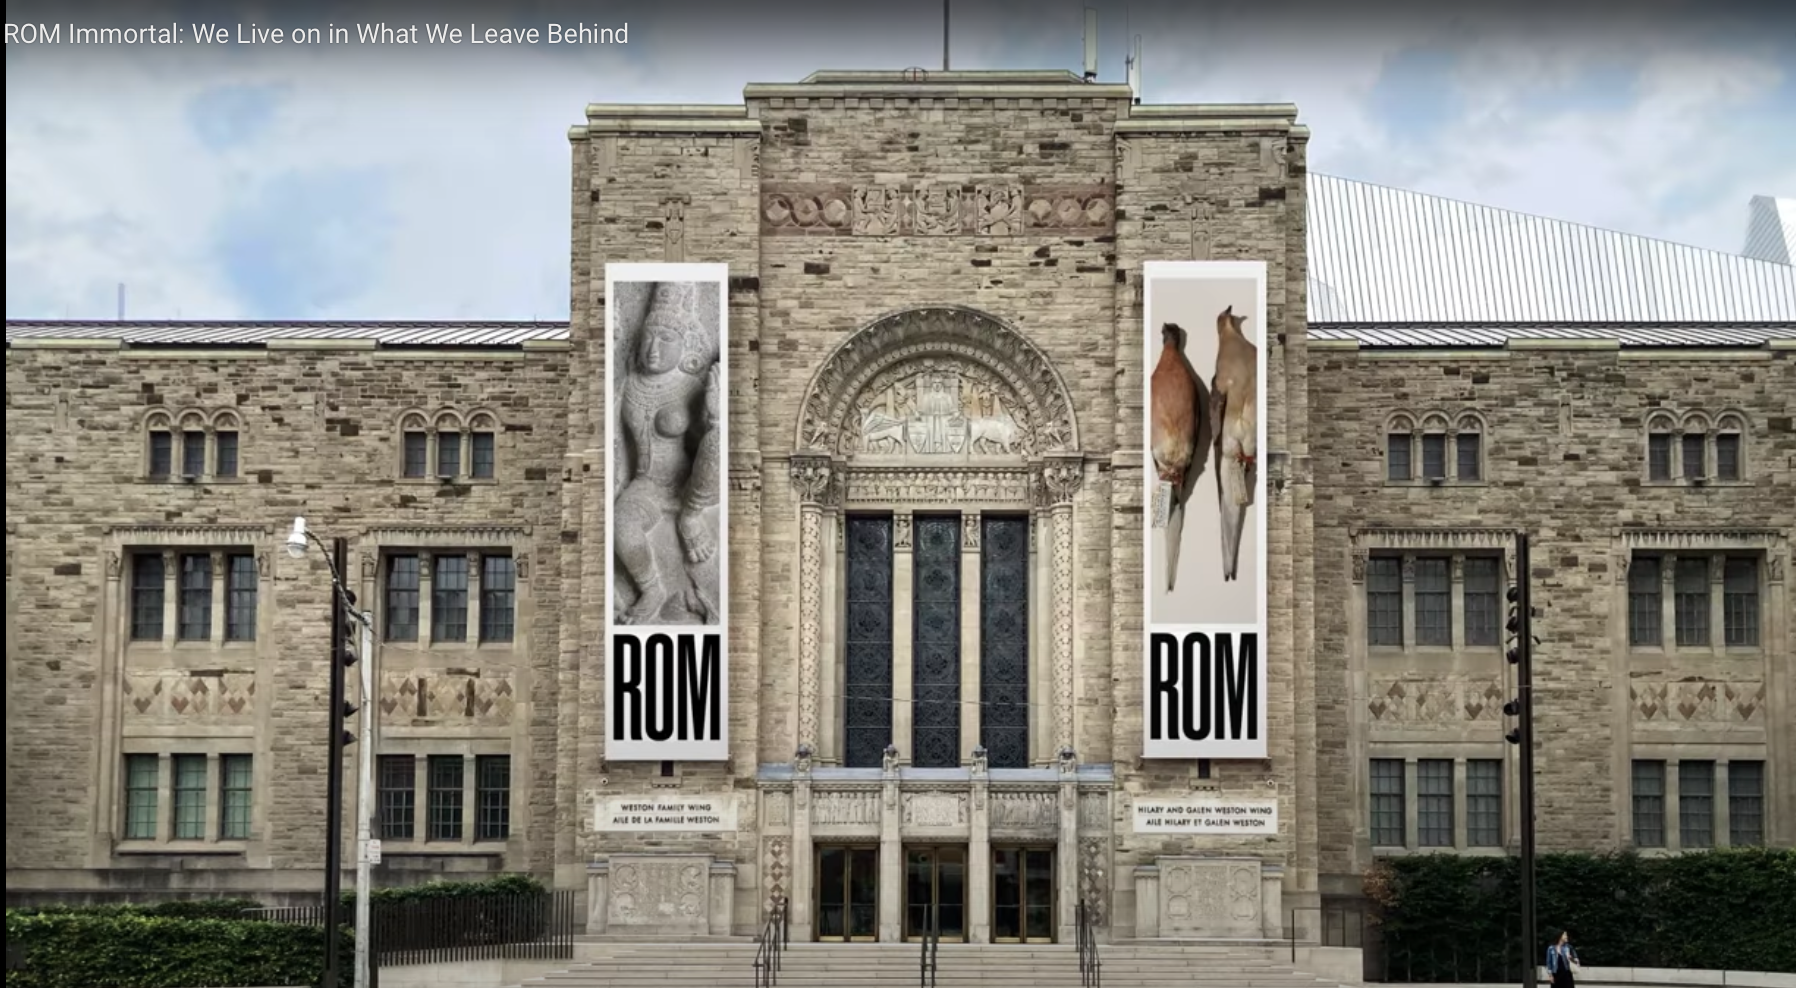 Featured Exhibitions & Experiences at the Royal Ontario Museum